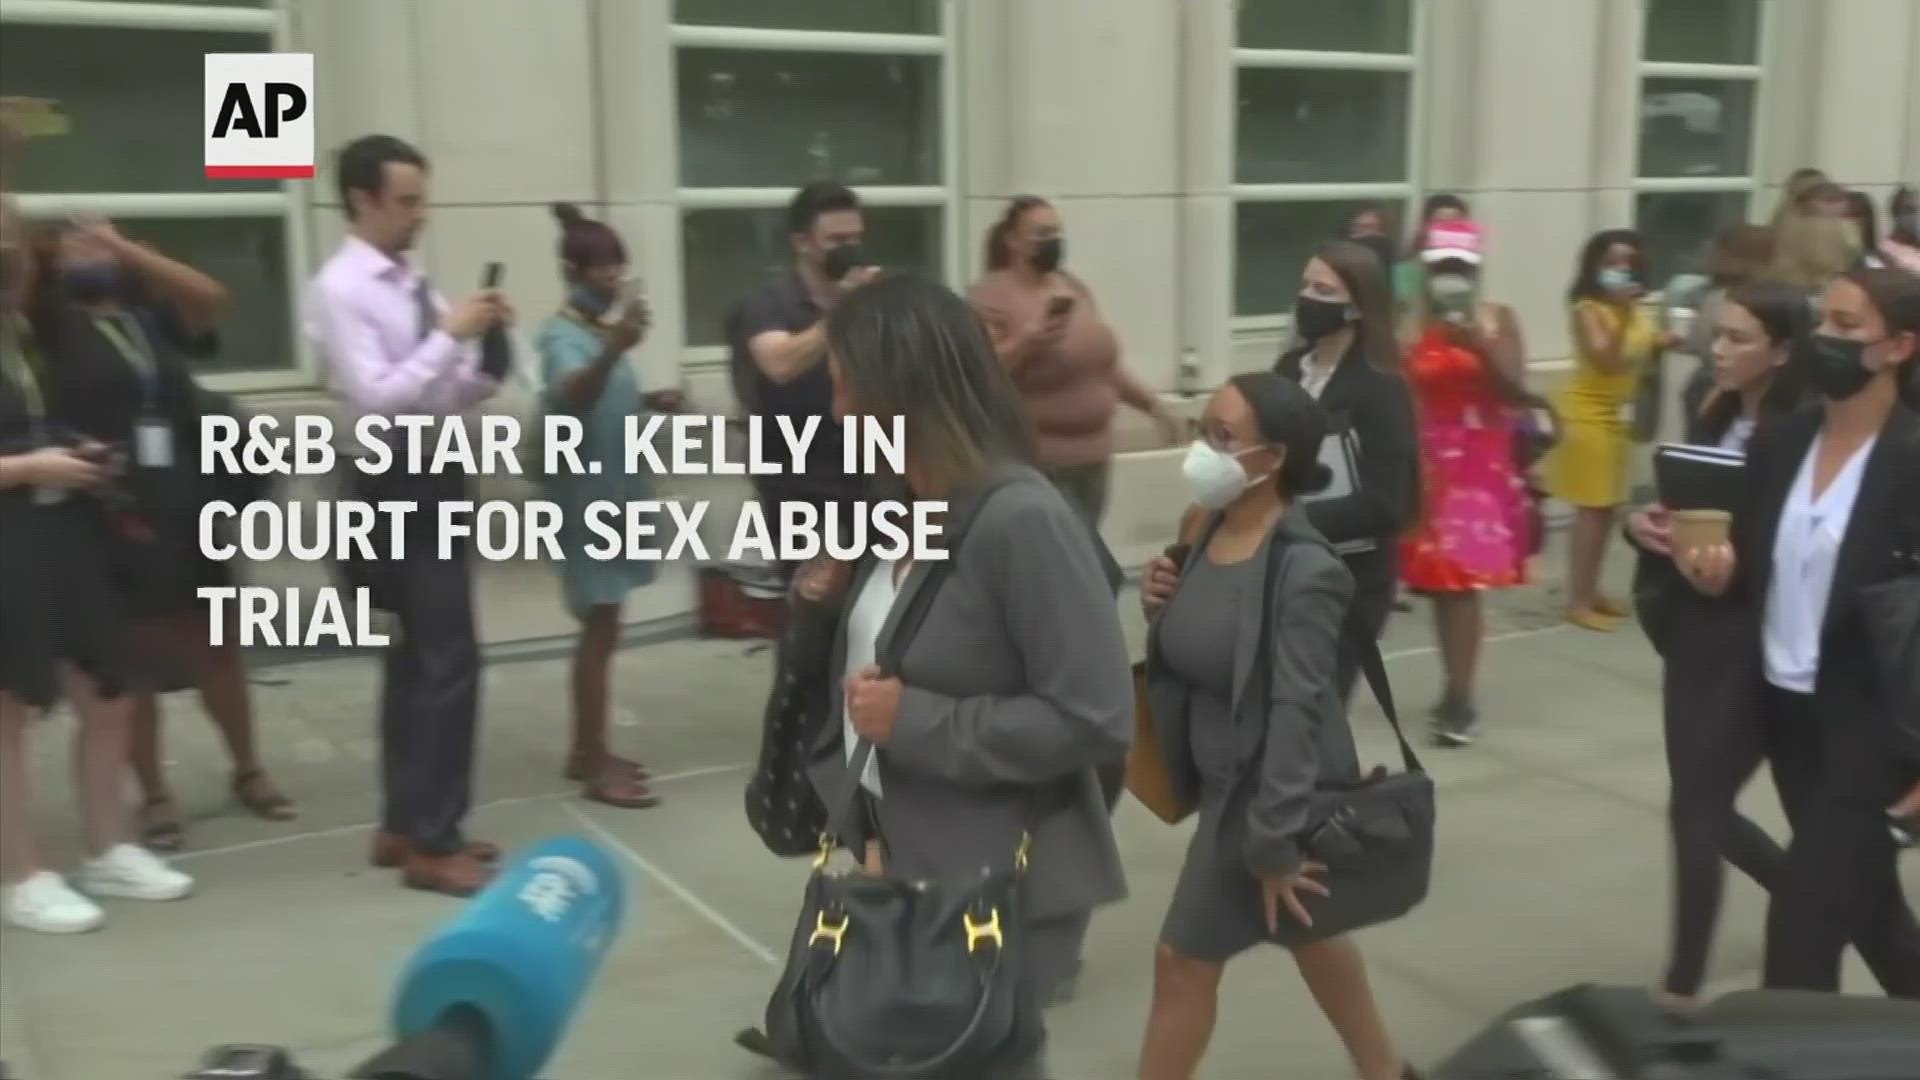 R. Kelly is back in a criminal court on Wednesday for opening statements in his trial arising from years of allegations that he sexually abused women and girls.